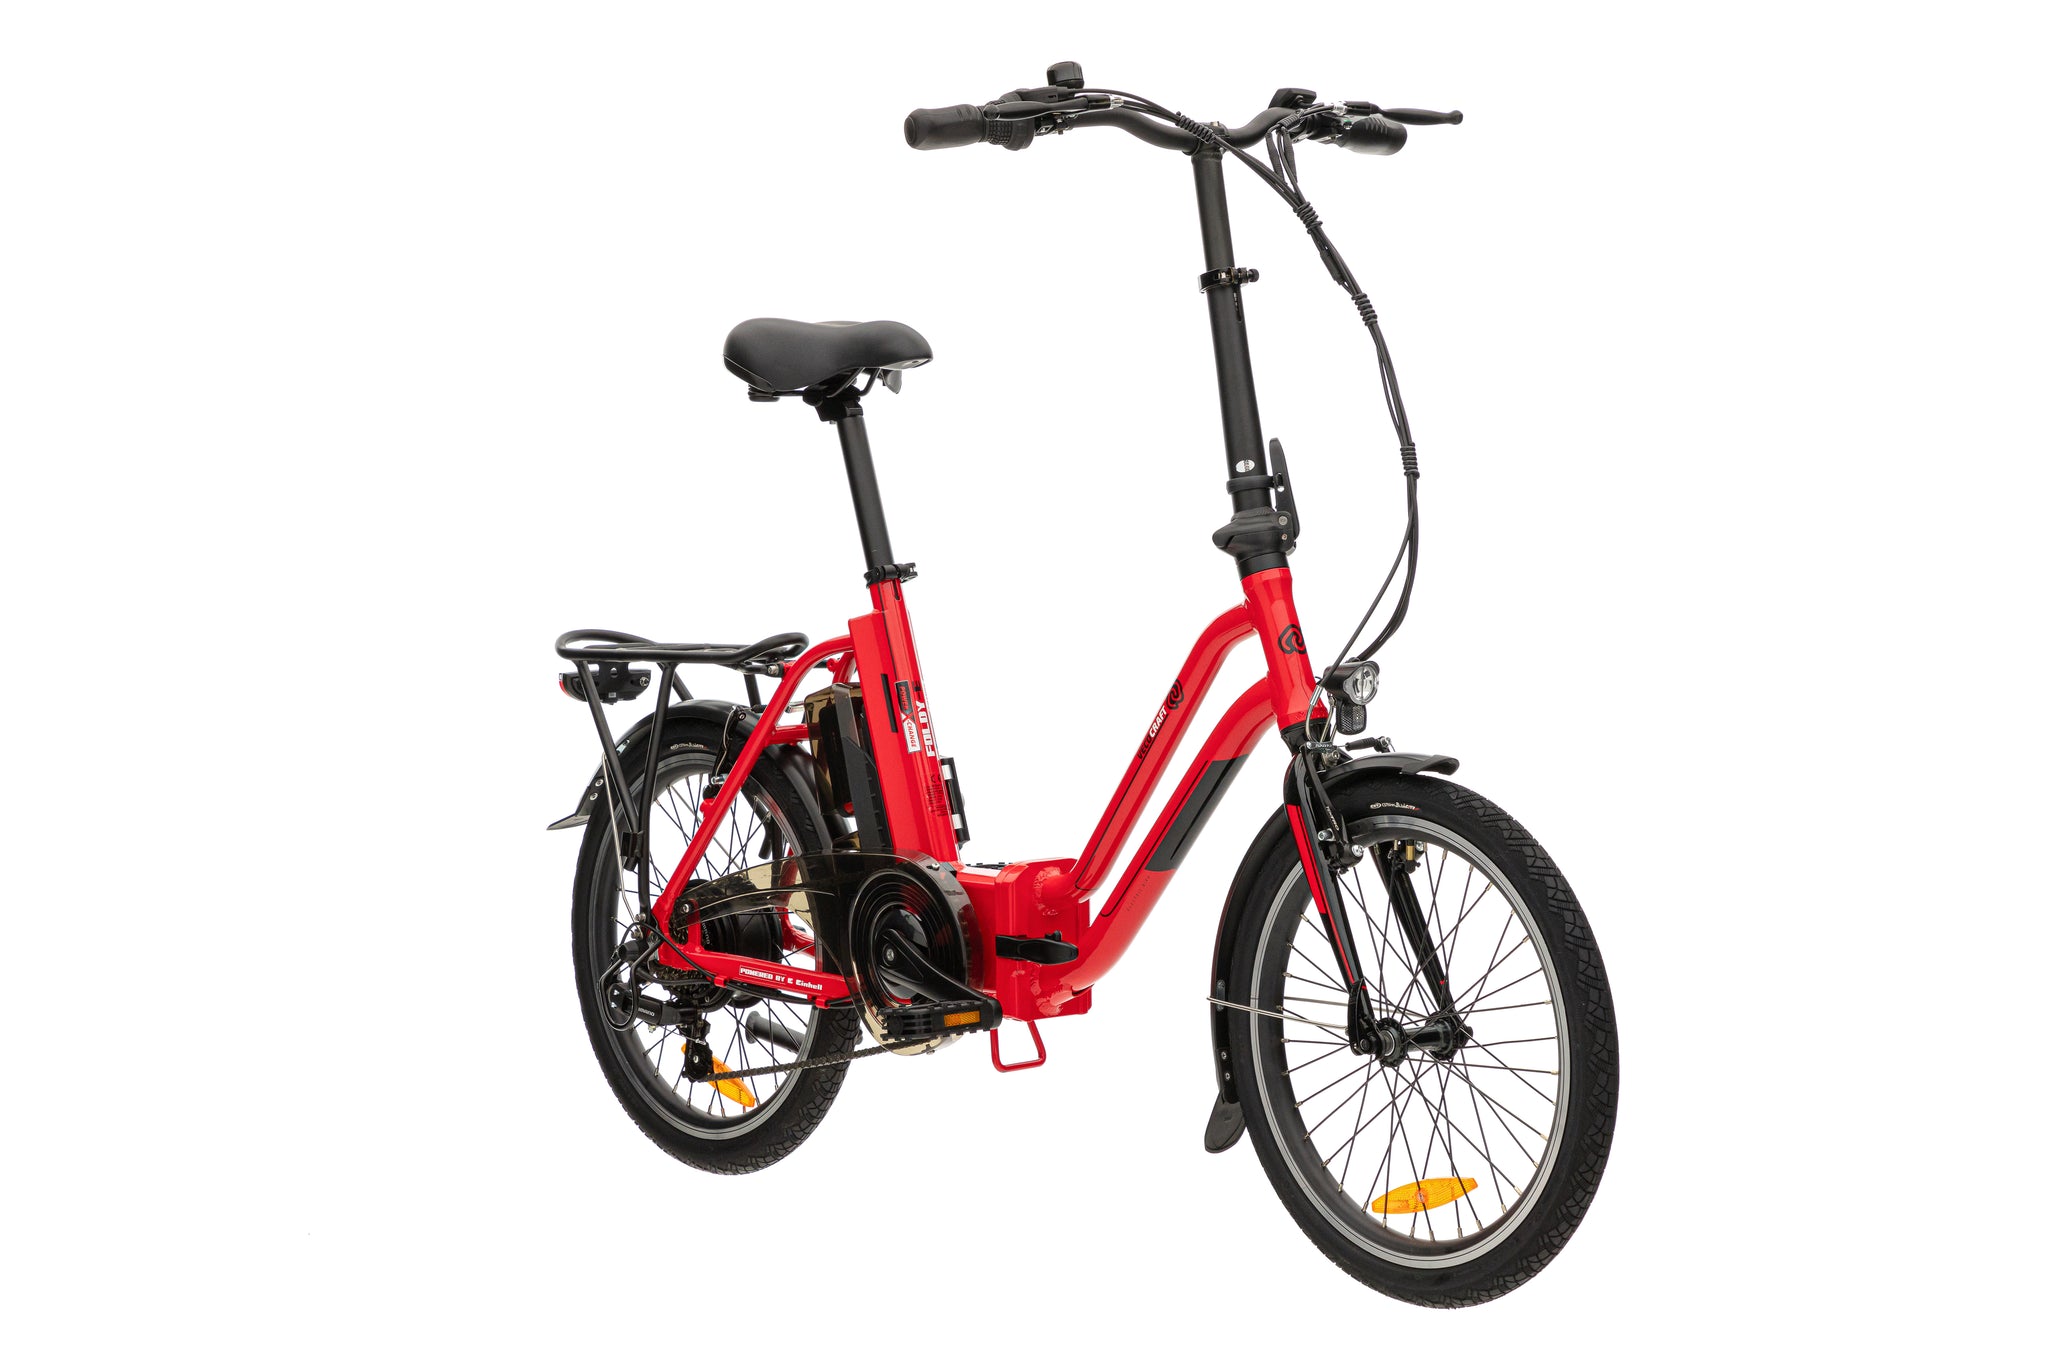 Vecocraft E-Klapprad Foldy-E Ebike_Rot Compatible with Einhell 18 V 2 x 5.2 Ah Batteries